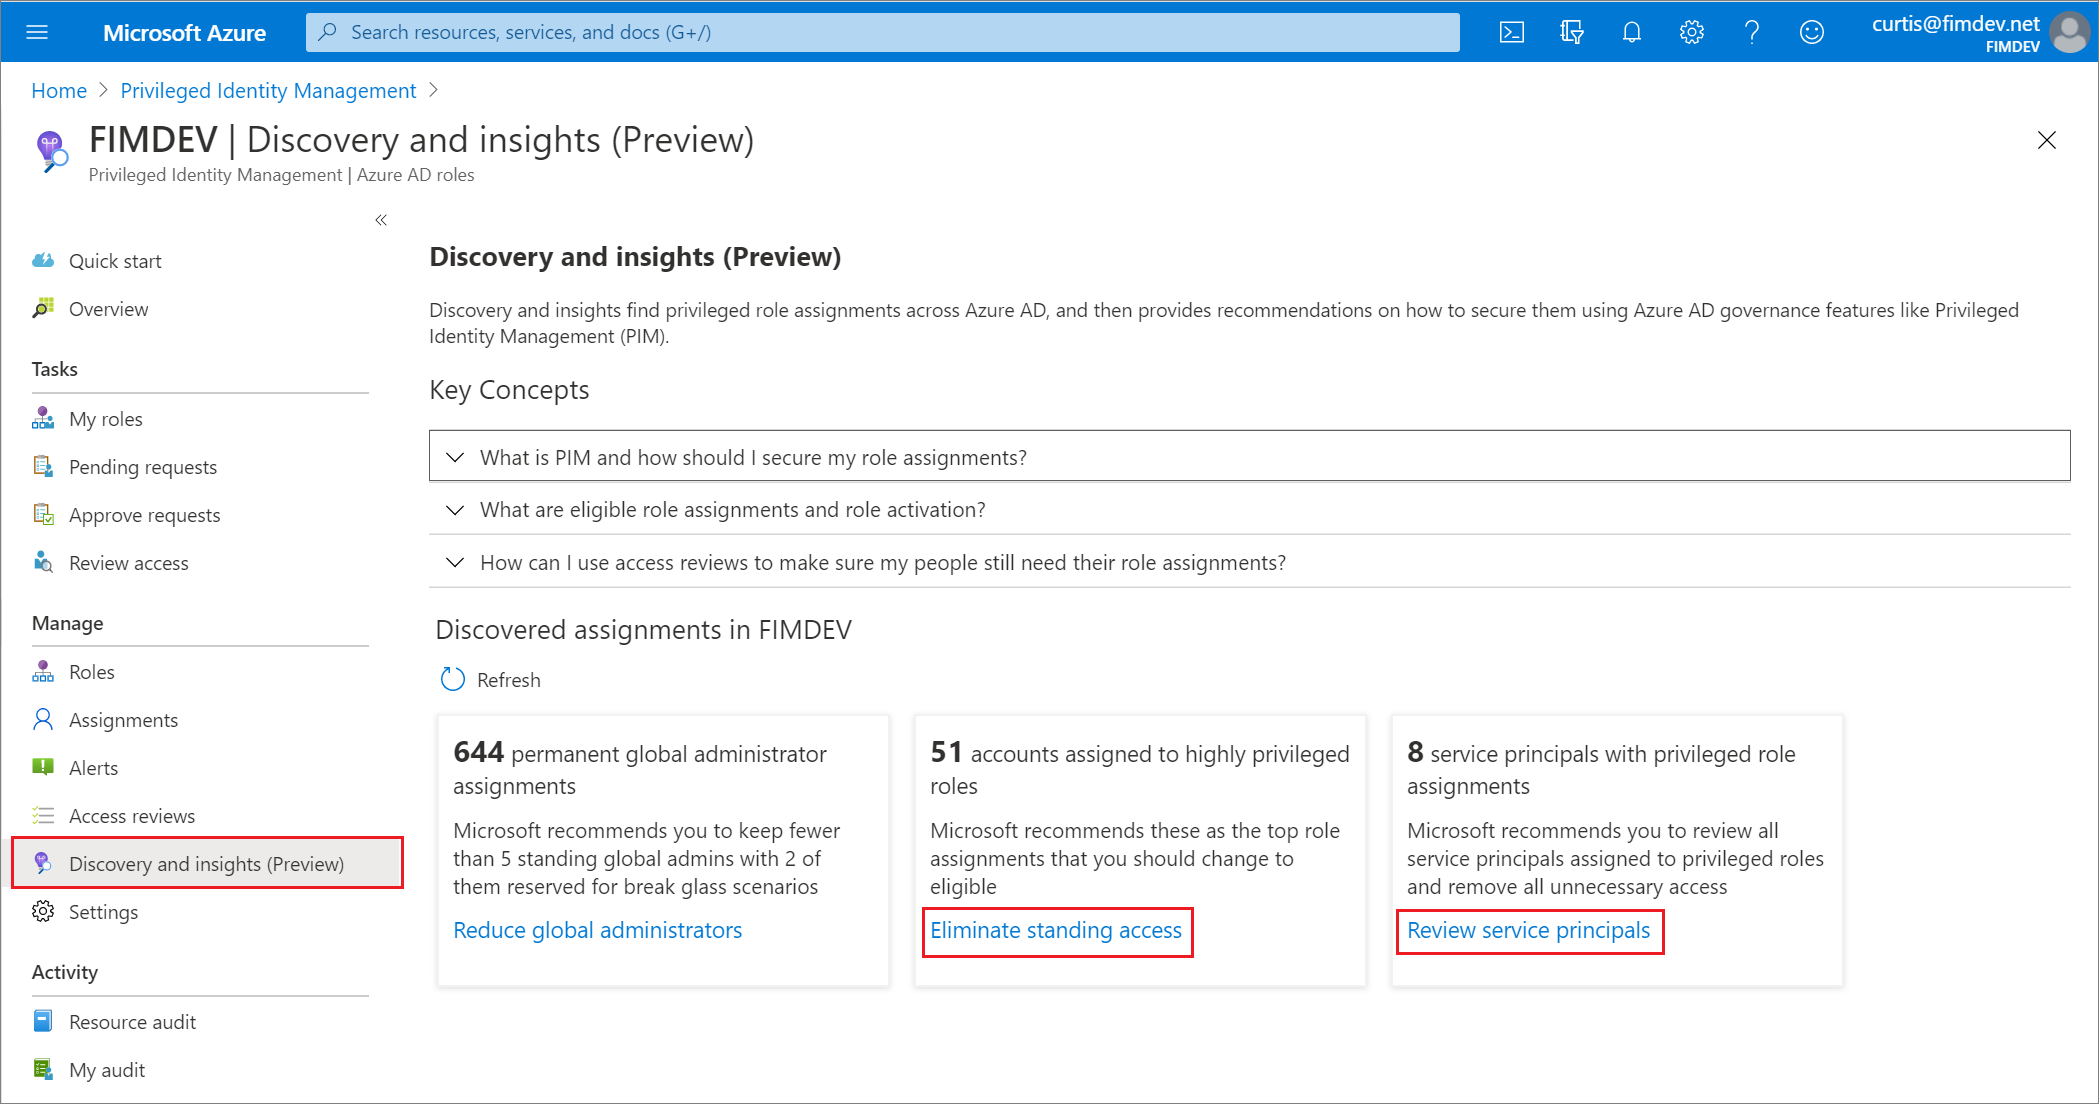 Additional Insights options to eliminate standing access and review service principals 